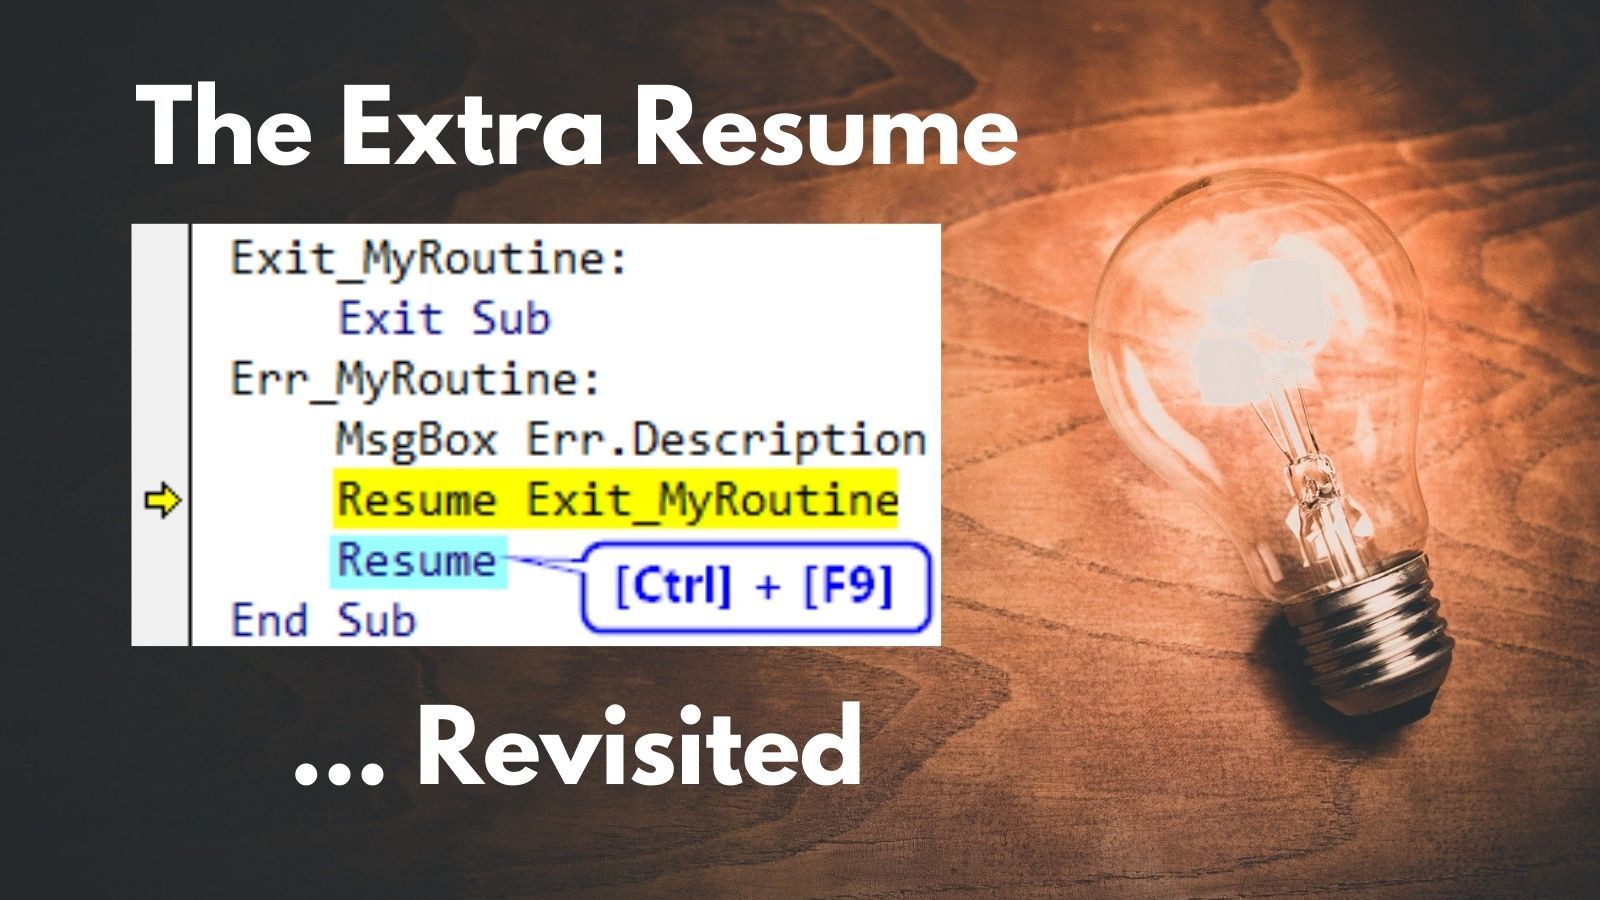 The Extra Resume: Revisited